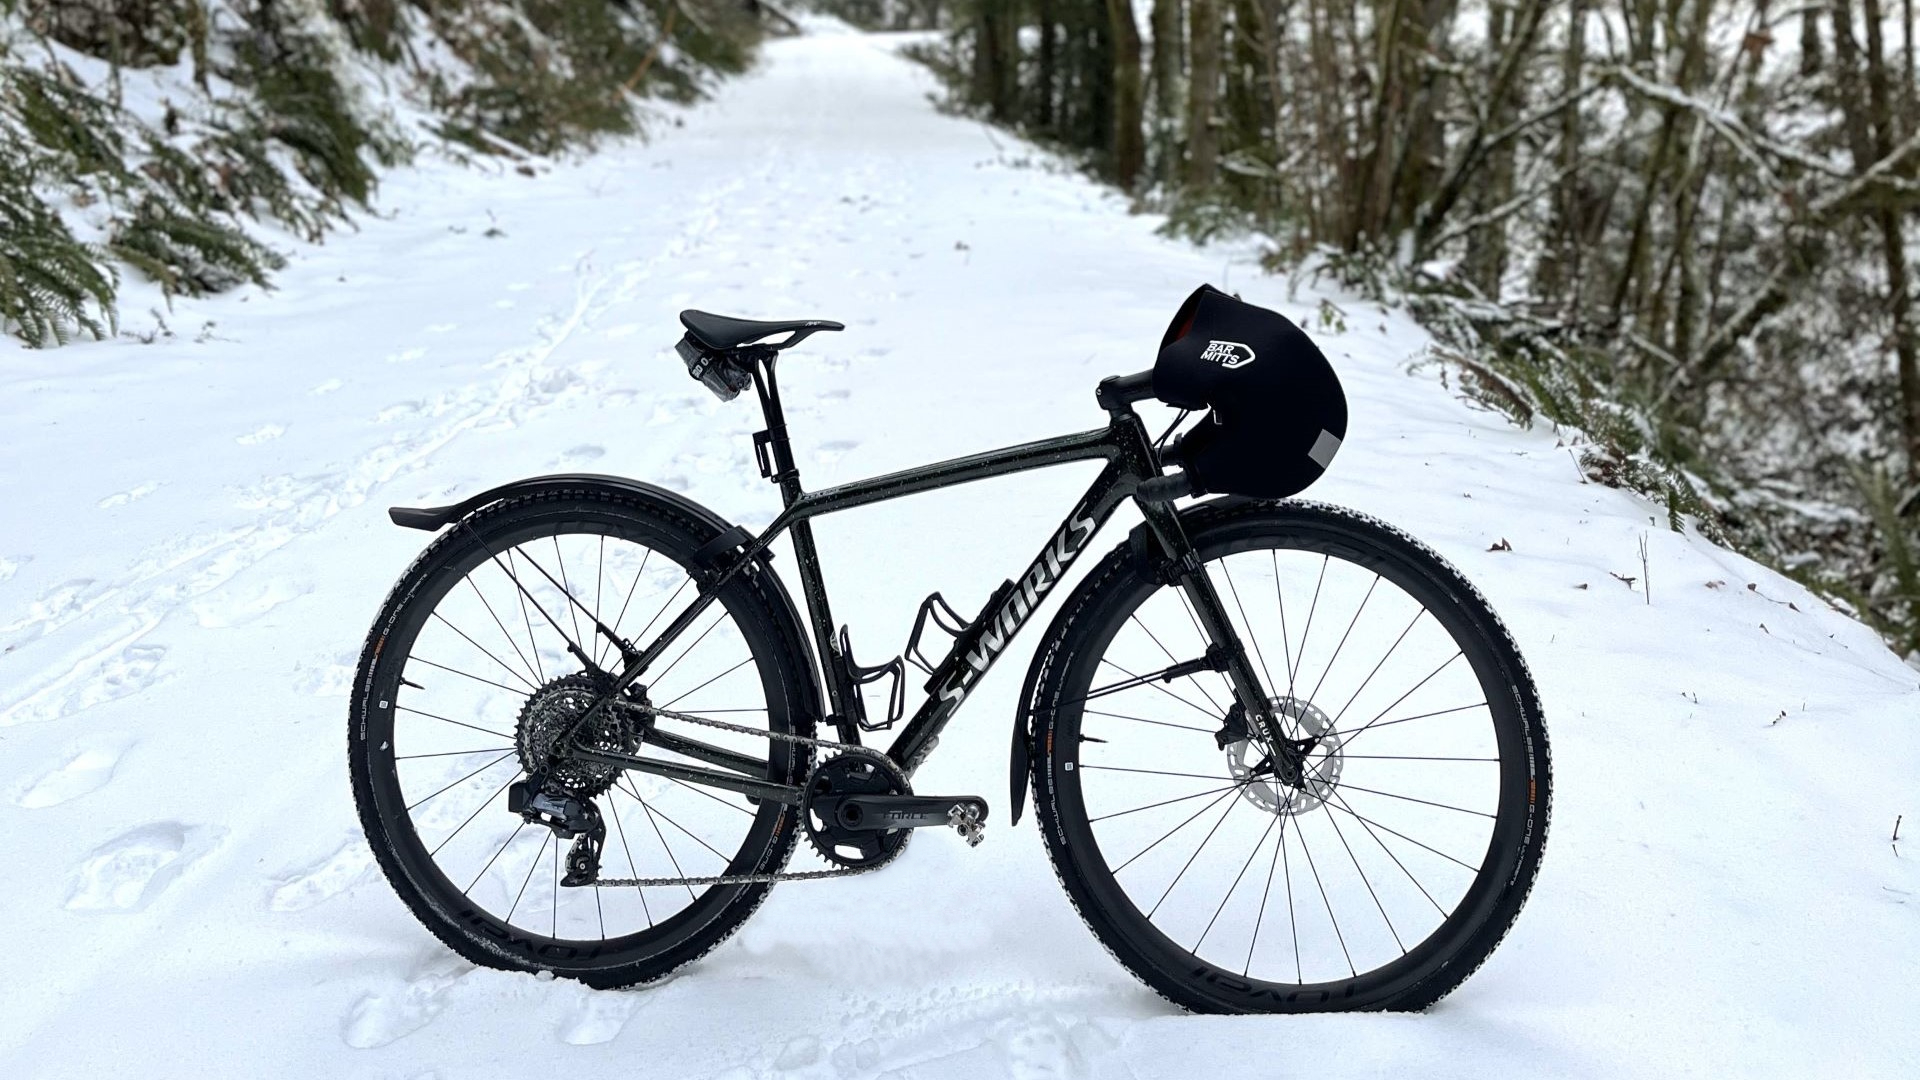 Winter Cycling: Embrace the Cold - We Love Cycling Magazine